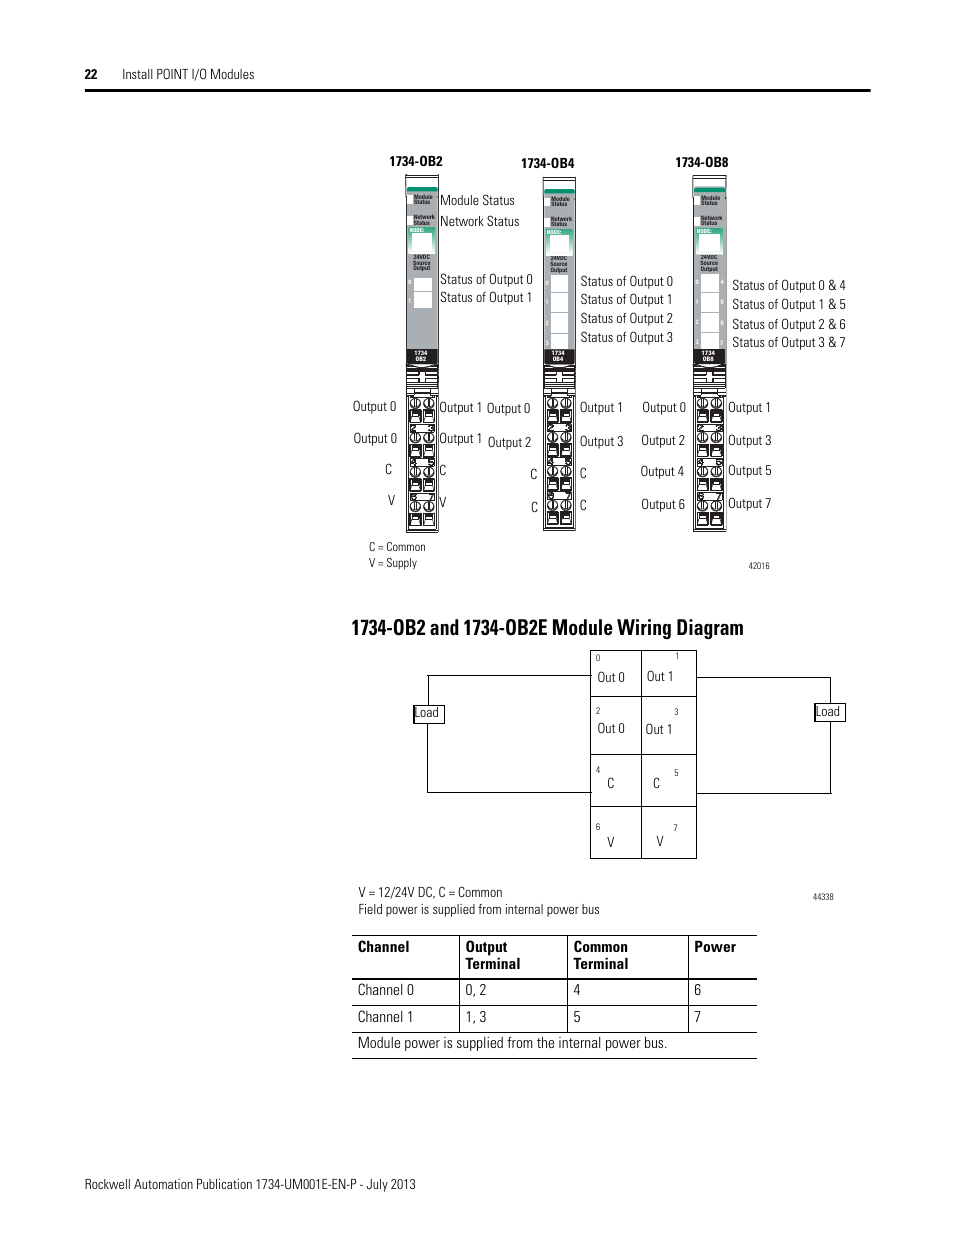 1734-ob2 and 1734-ob2e module wiring diagram | Rockwell Automation 1734